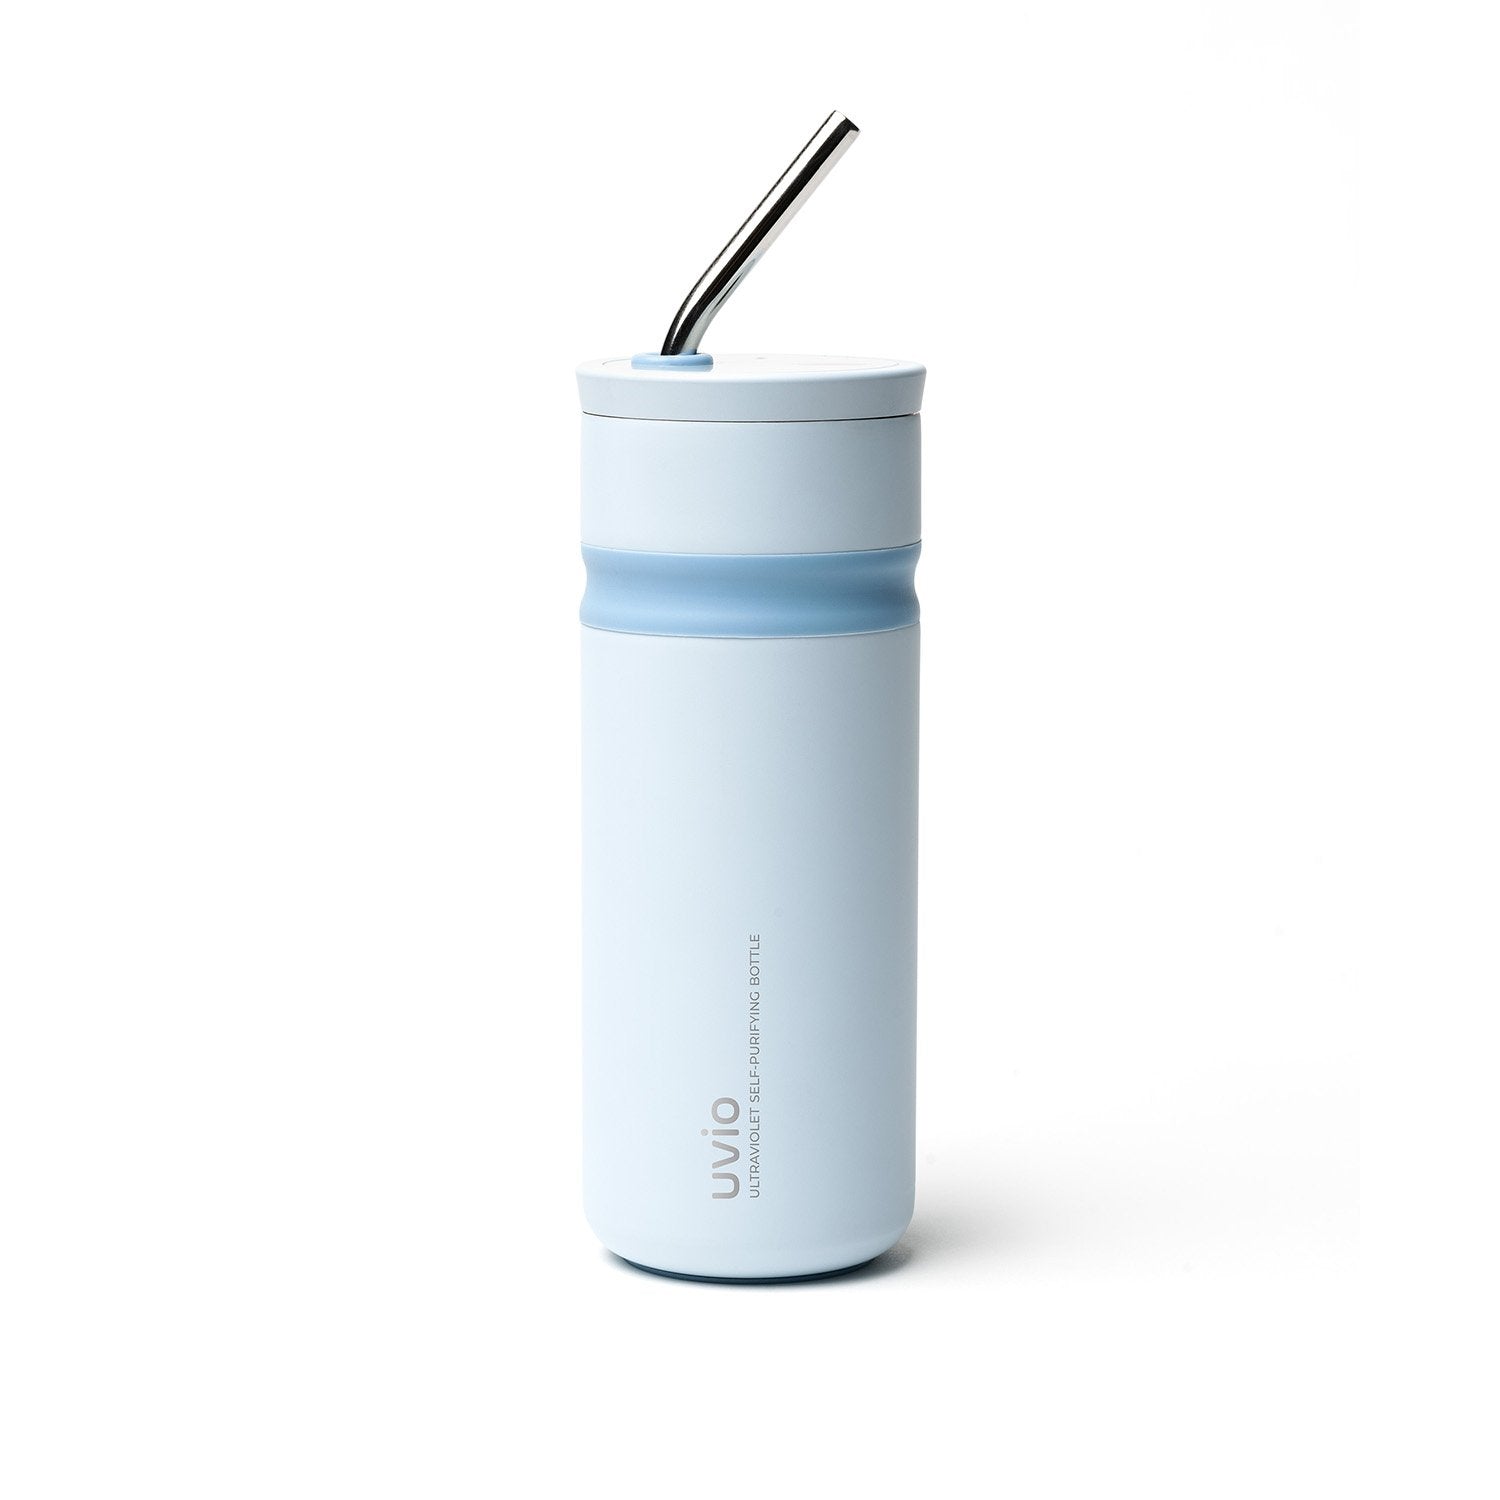 Light blue metal bottle with metal straw